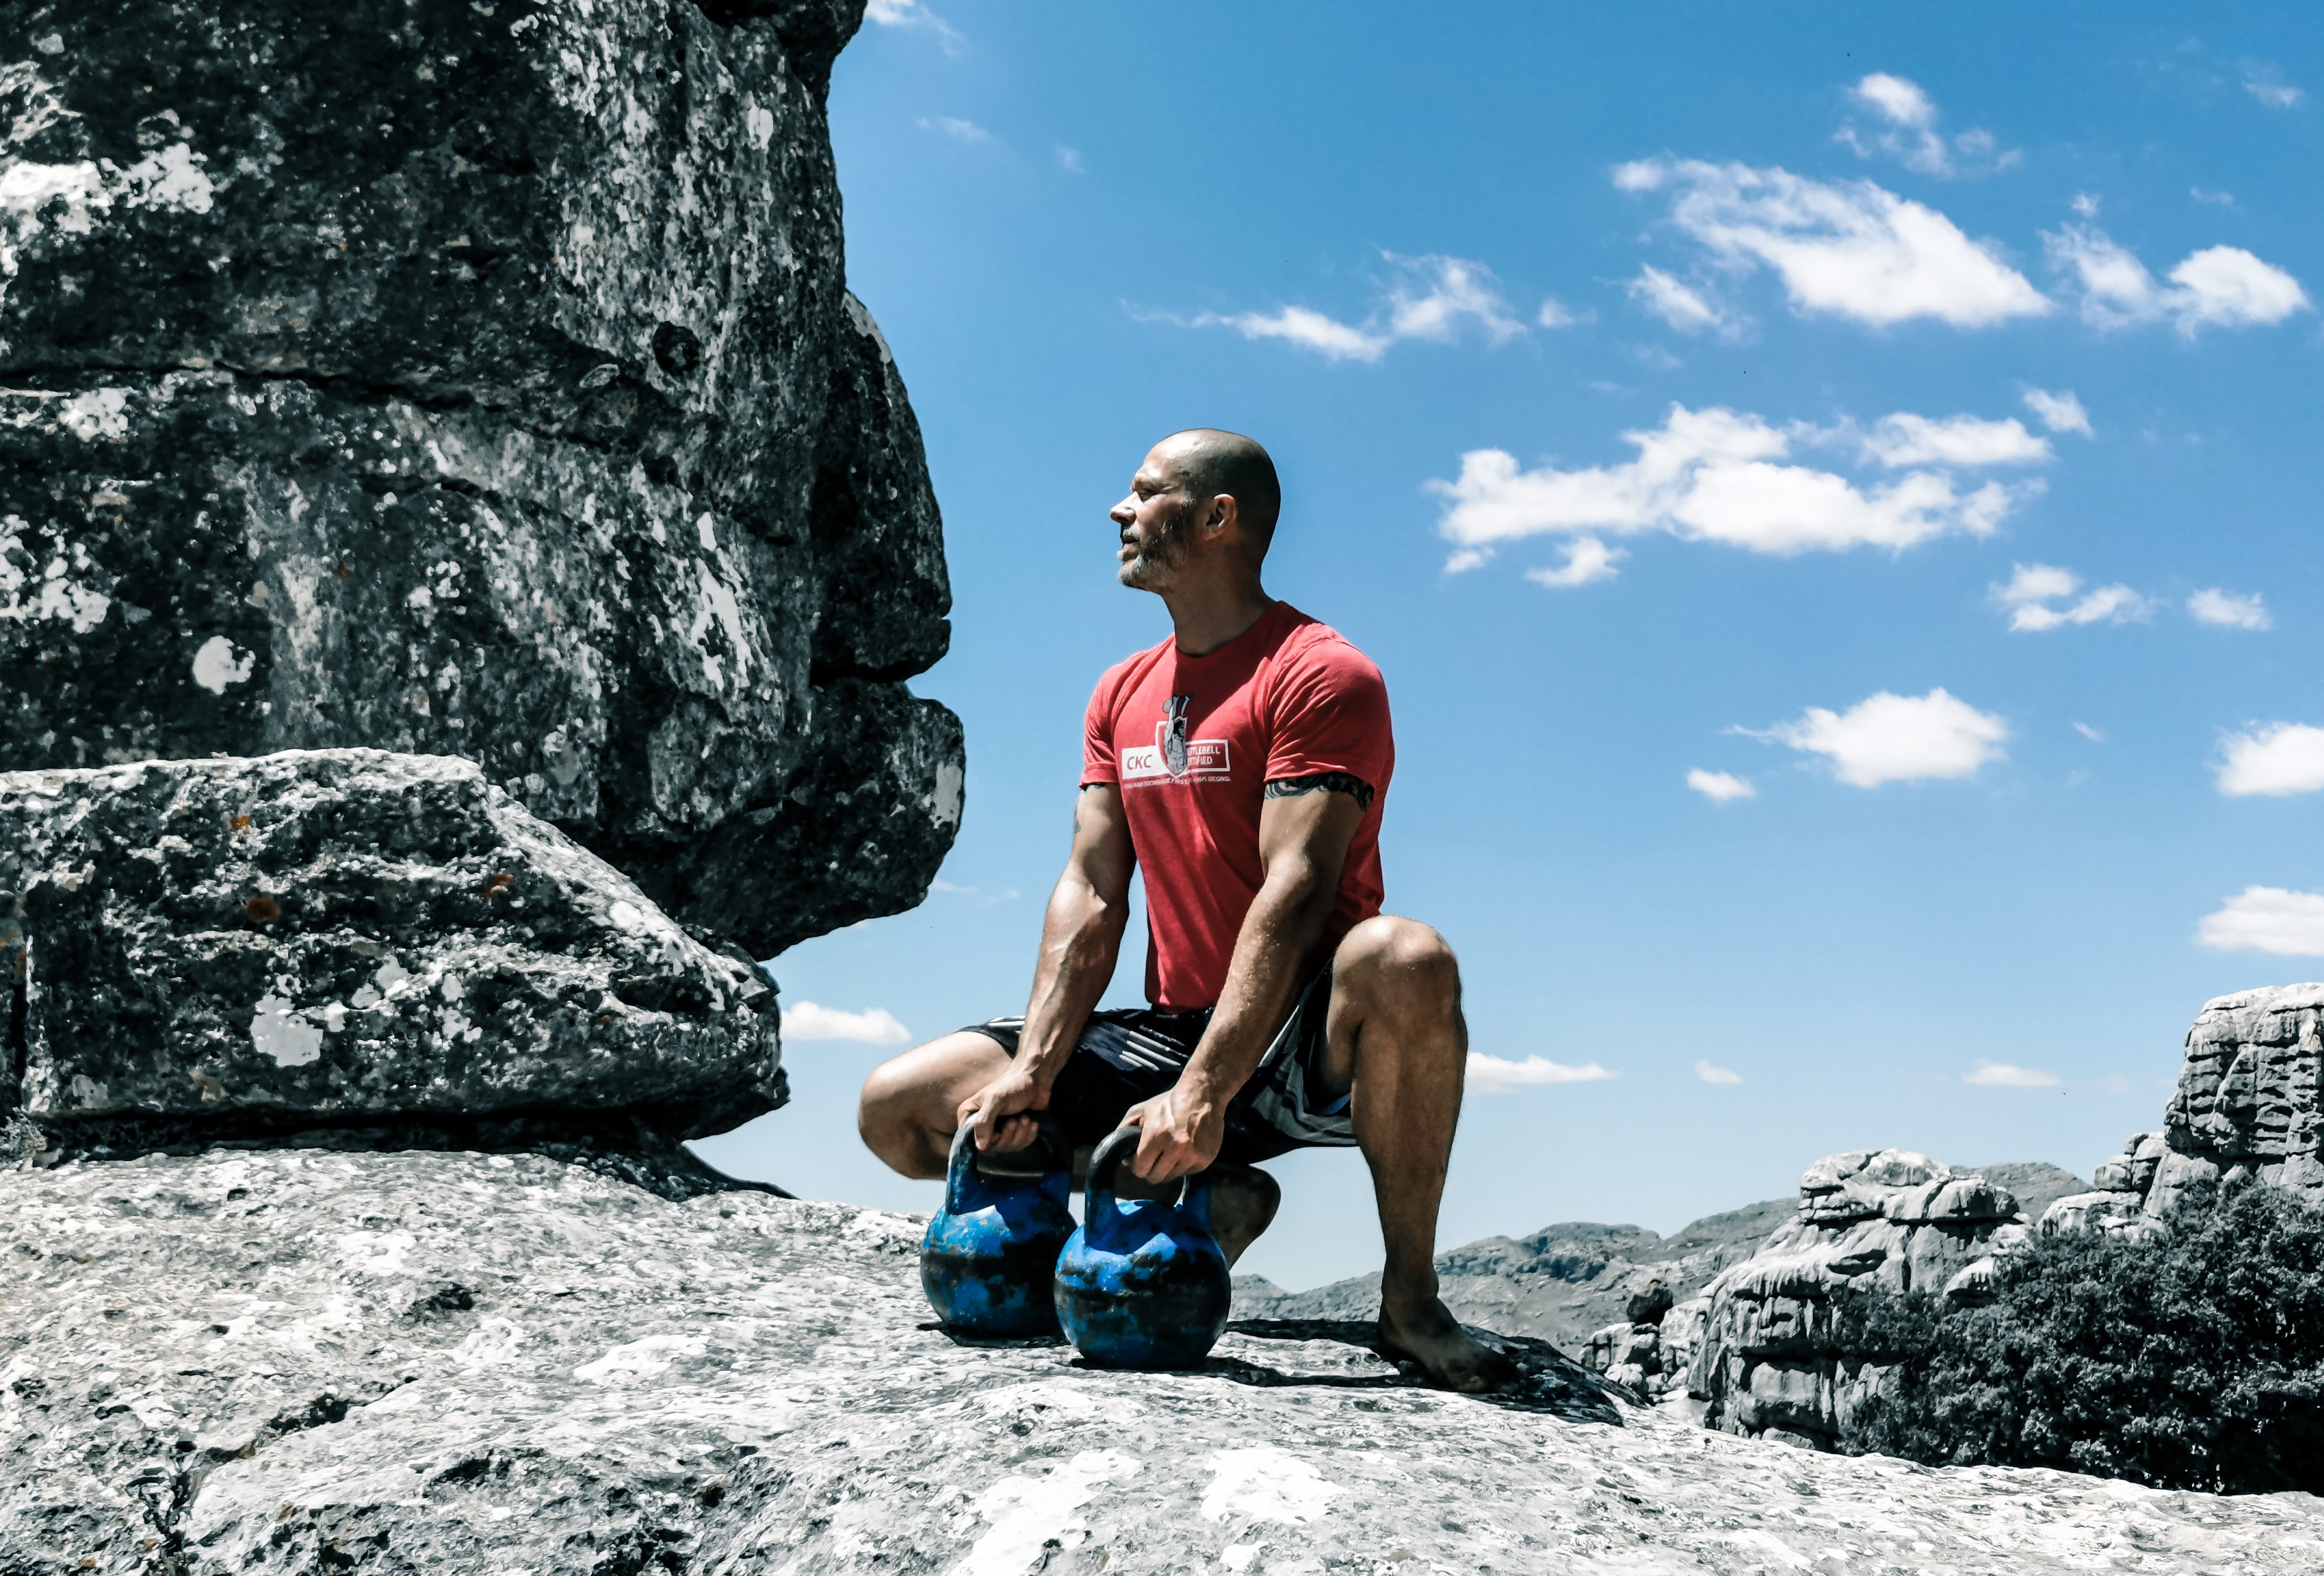 Man in red shirt squatting down on the edge of a cliff holding 2 blue kettle bell weights